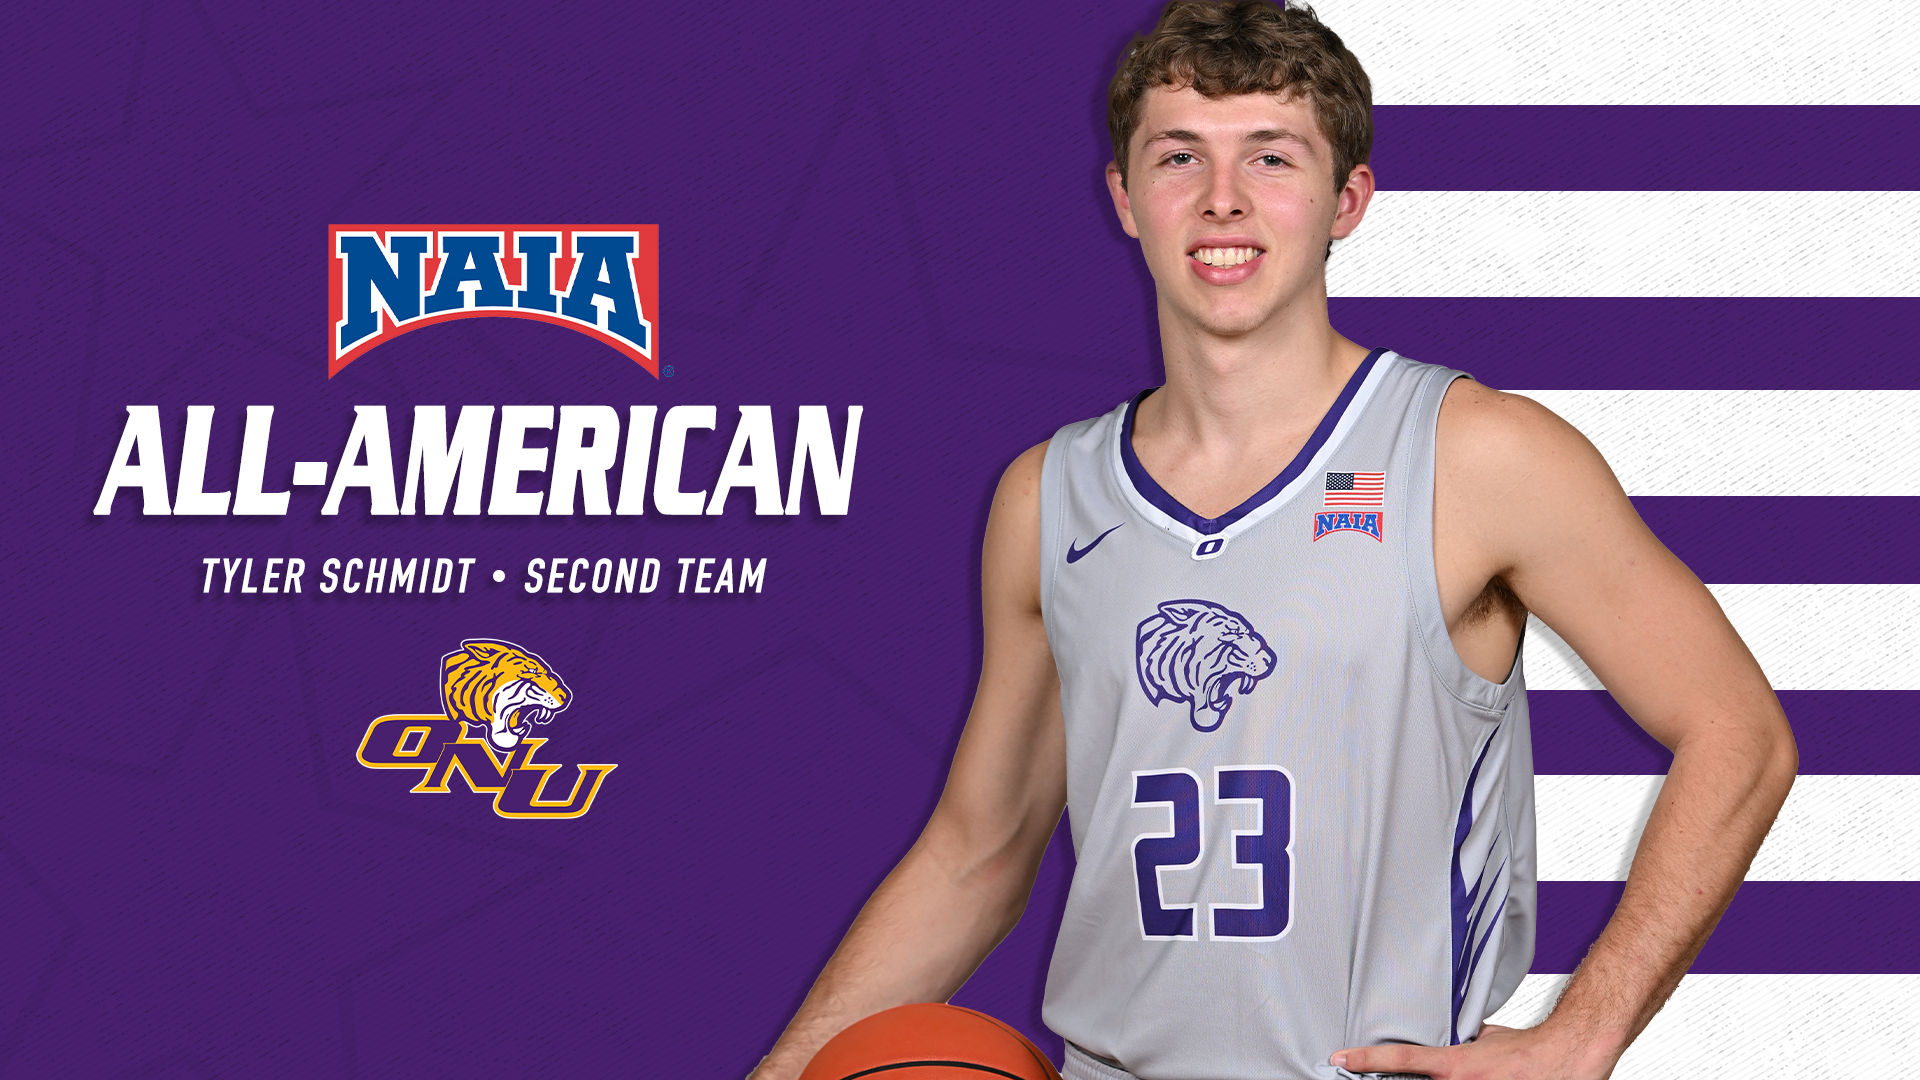 SCHMIDT NAMED NAIA SECOND TEAM ALL-AMERICAN